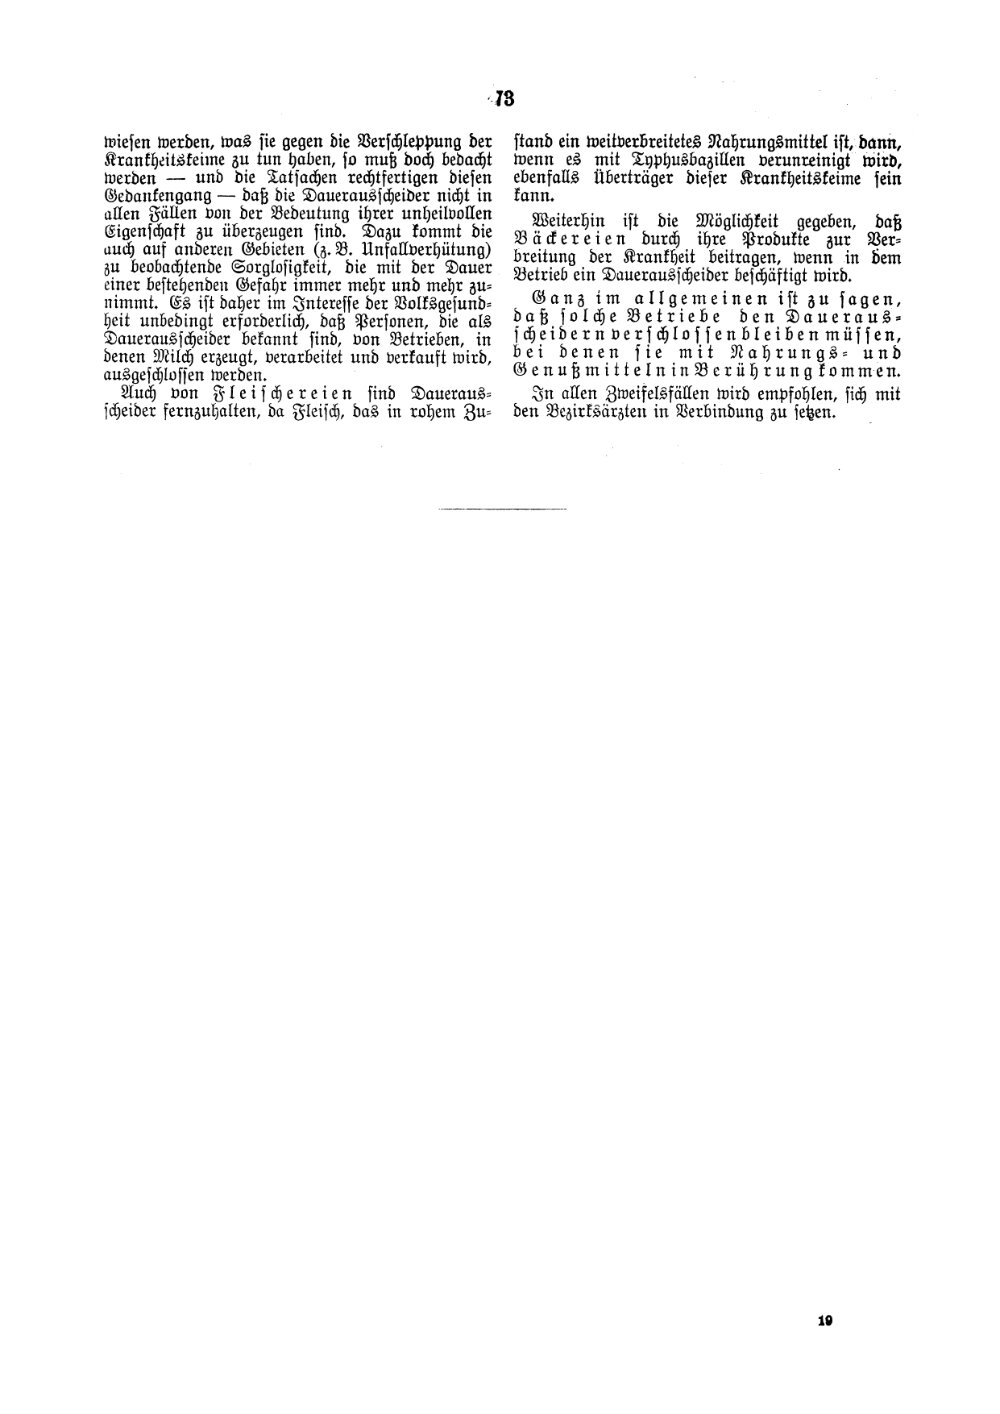 Scan of page 73